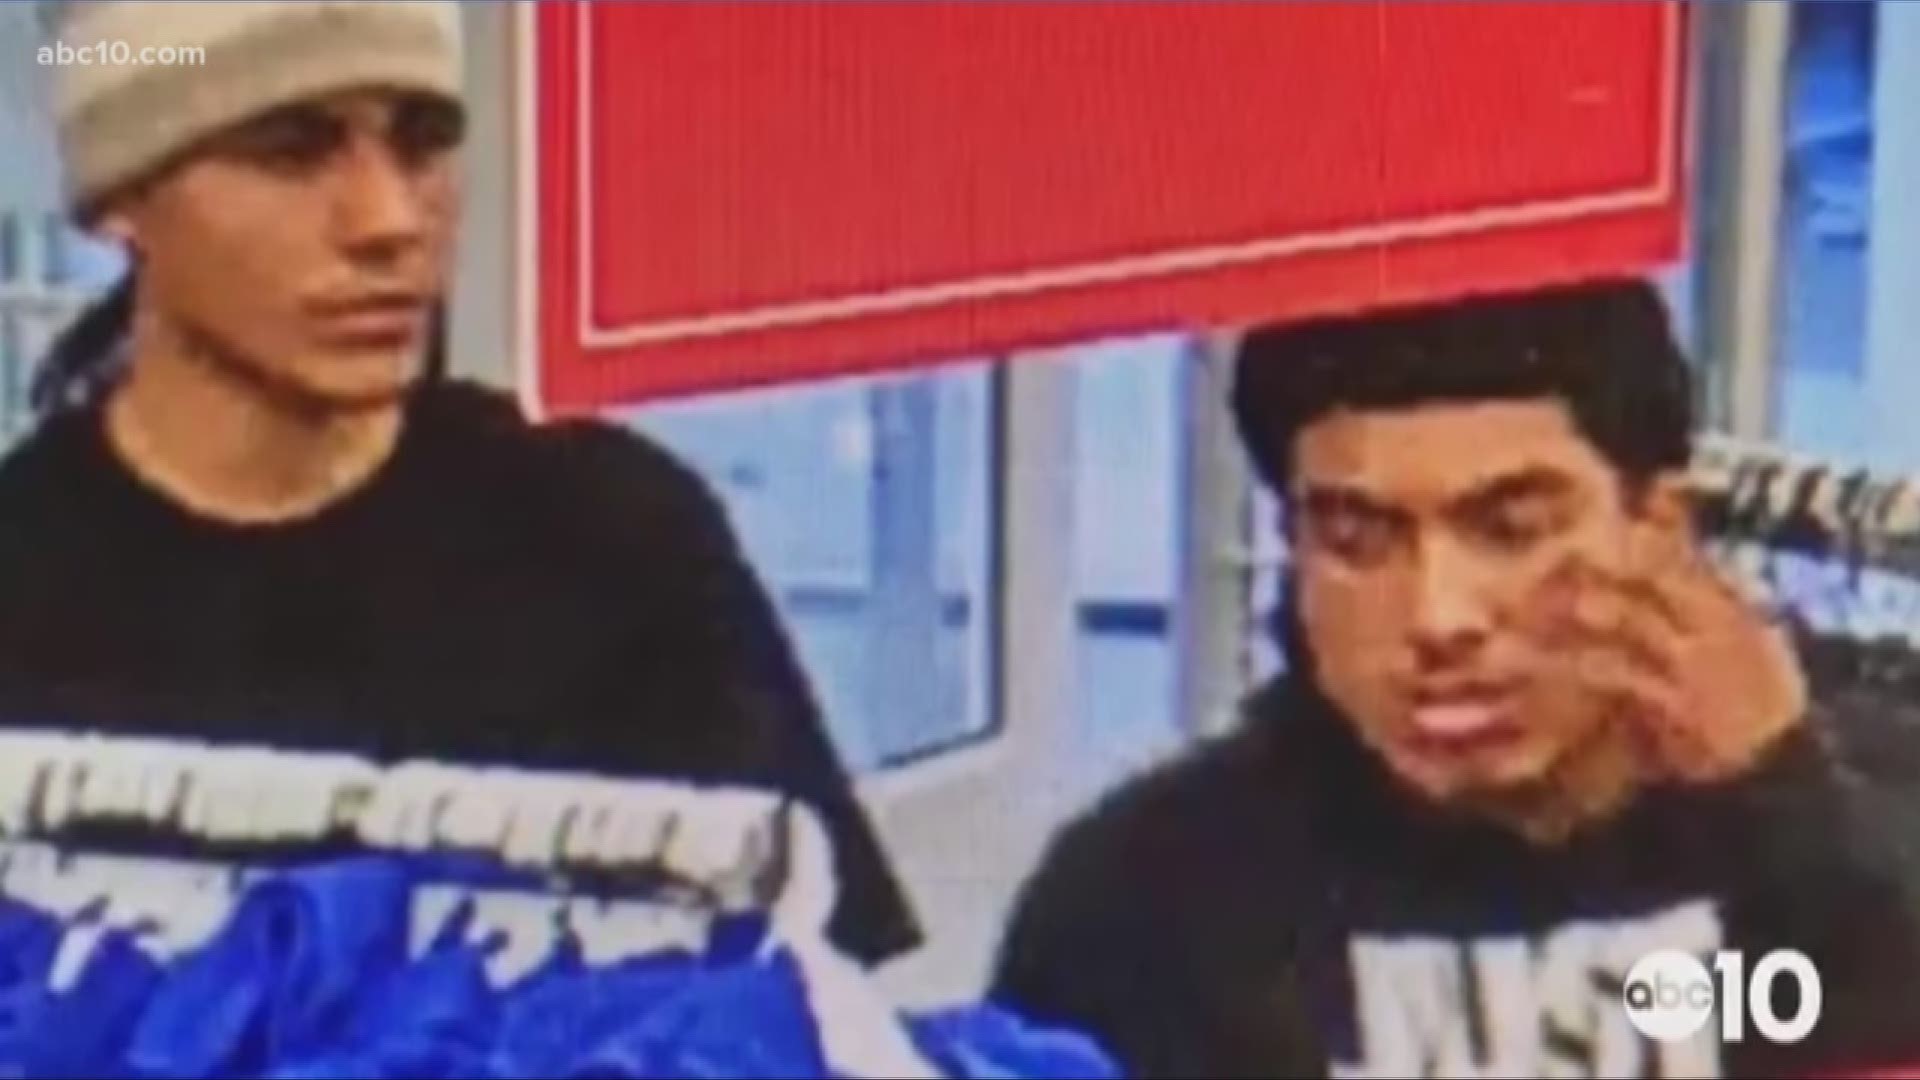 Manteca police are hoping you can help them find two men wanted for theft. Police say they stole up to 30 pairs of Adidas warm-up pants and 10 adidas jackets from the Manteca Kohl's on Friday.